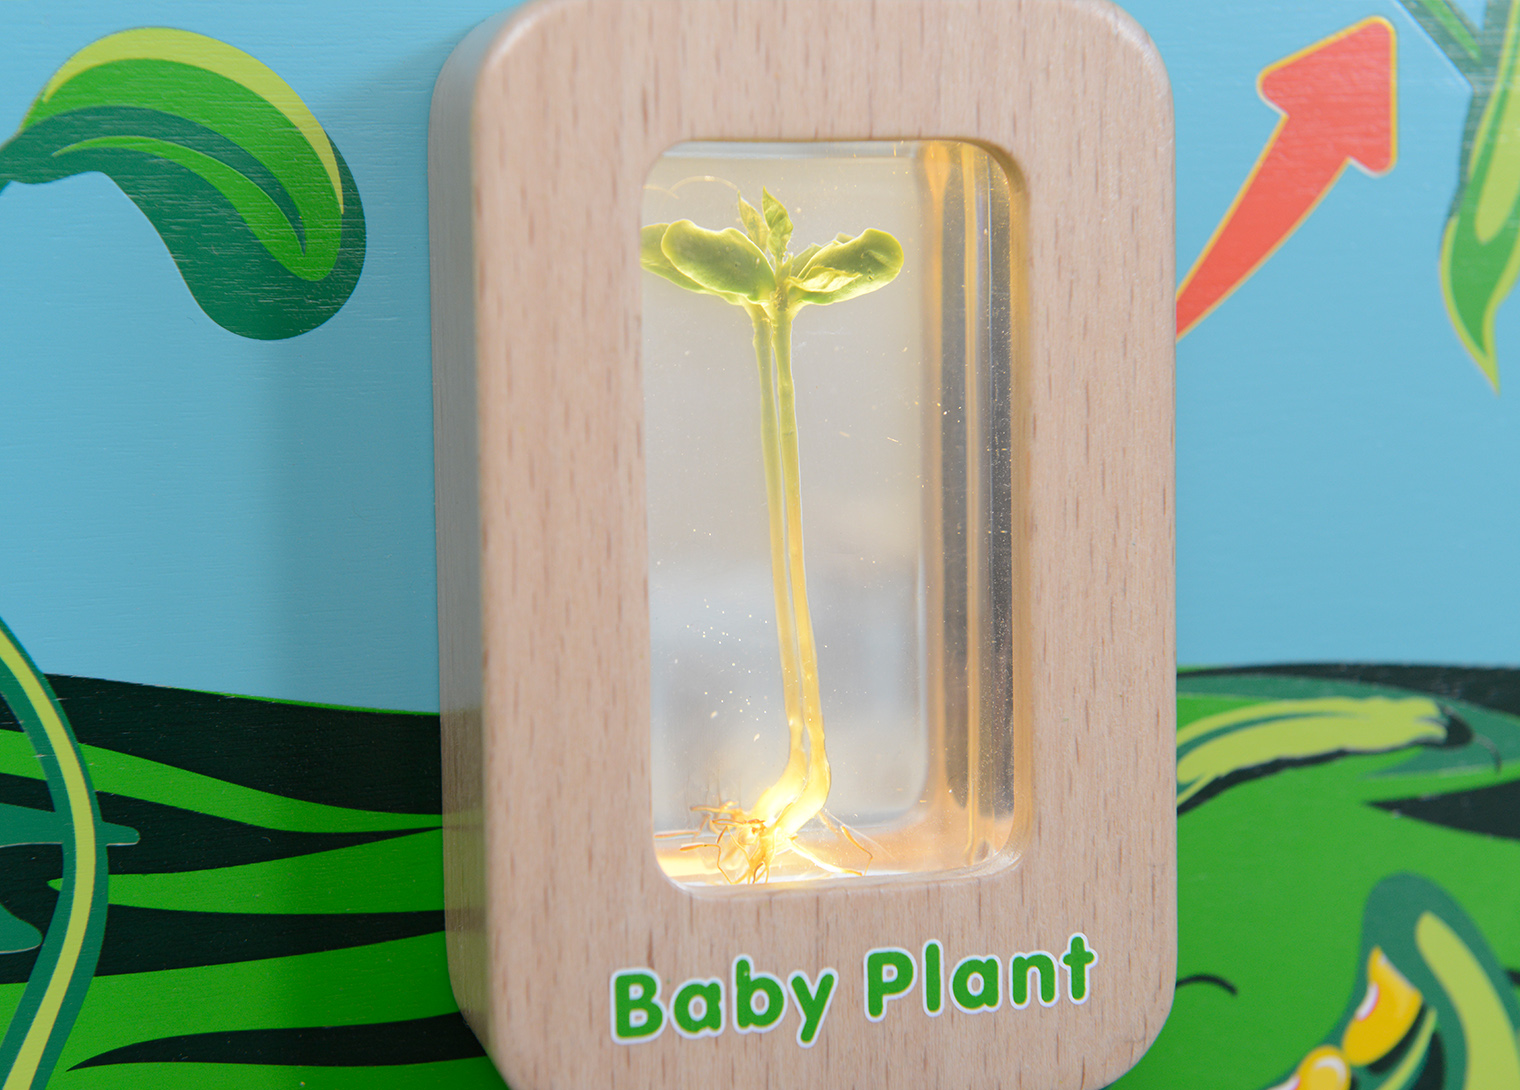 Light-Up Plant Life Cycle Stages Panel